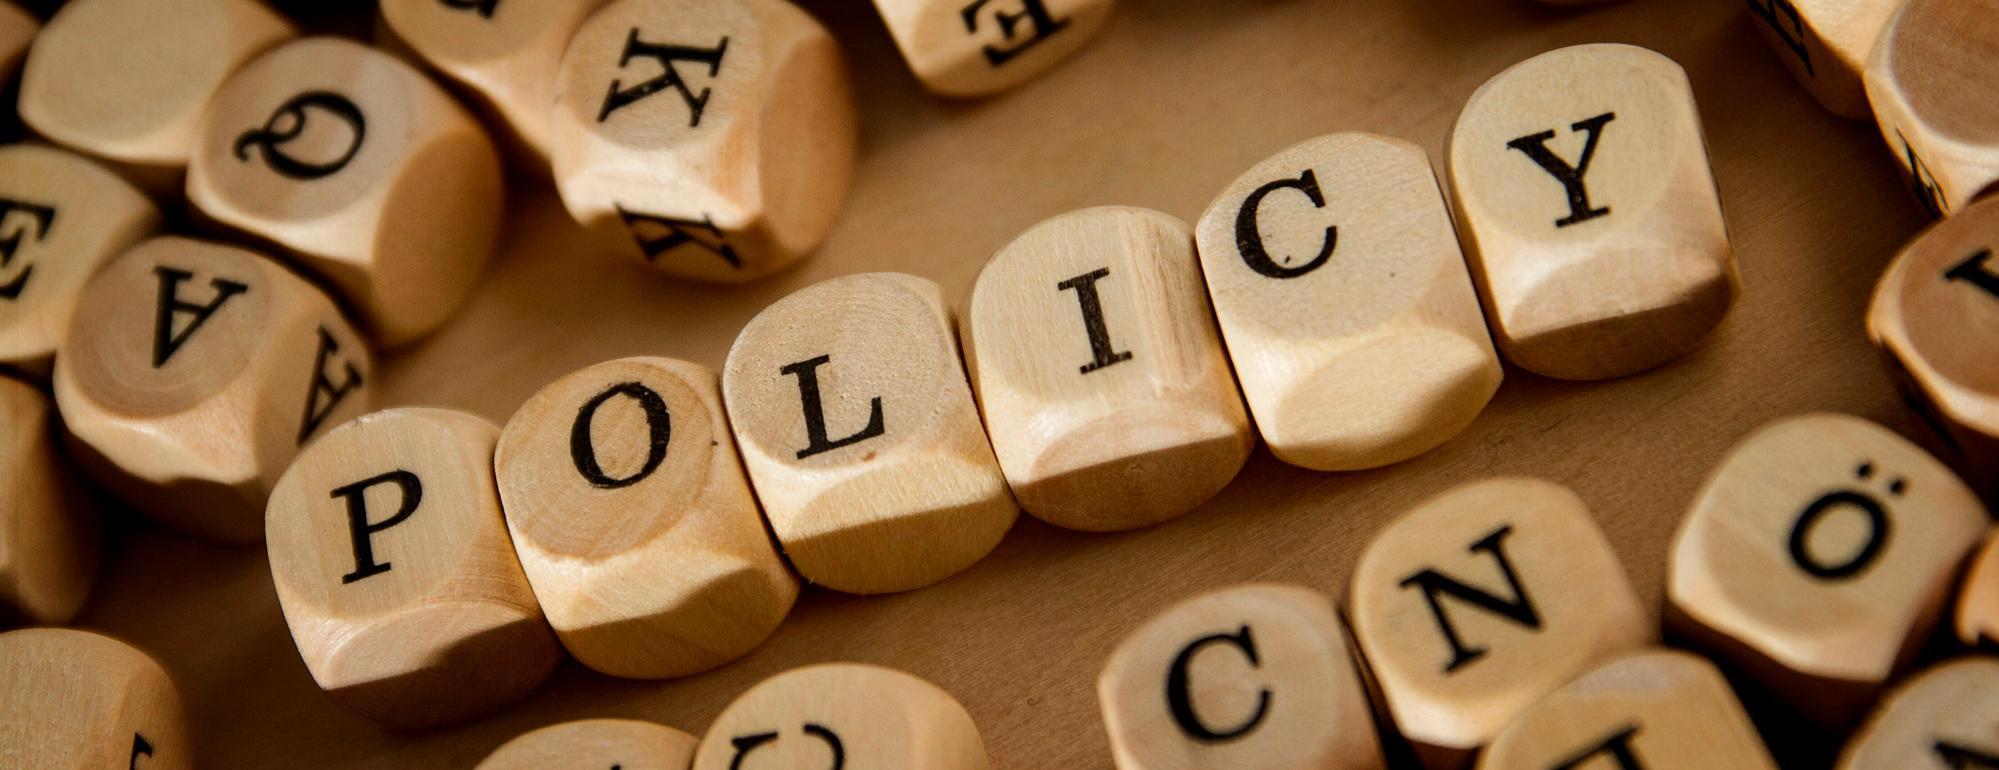 Policy written in lettered cubes